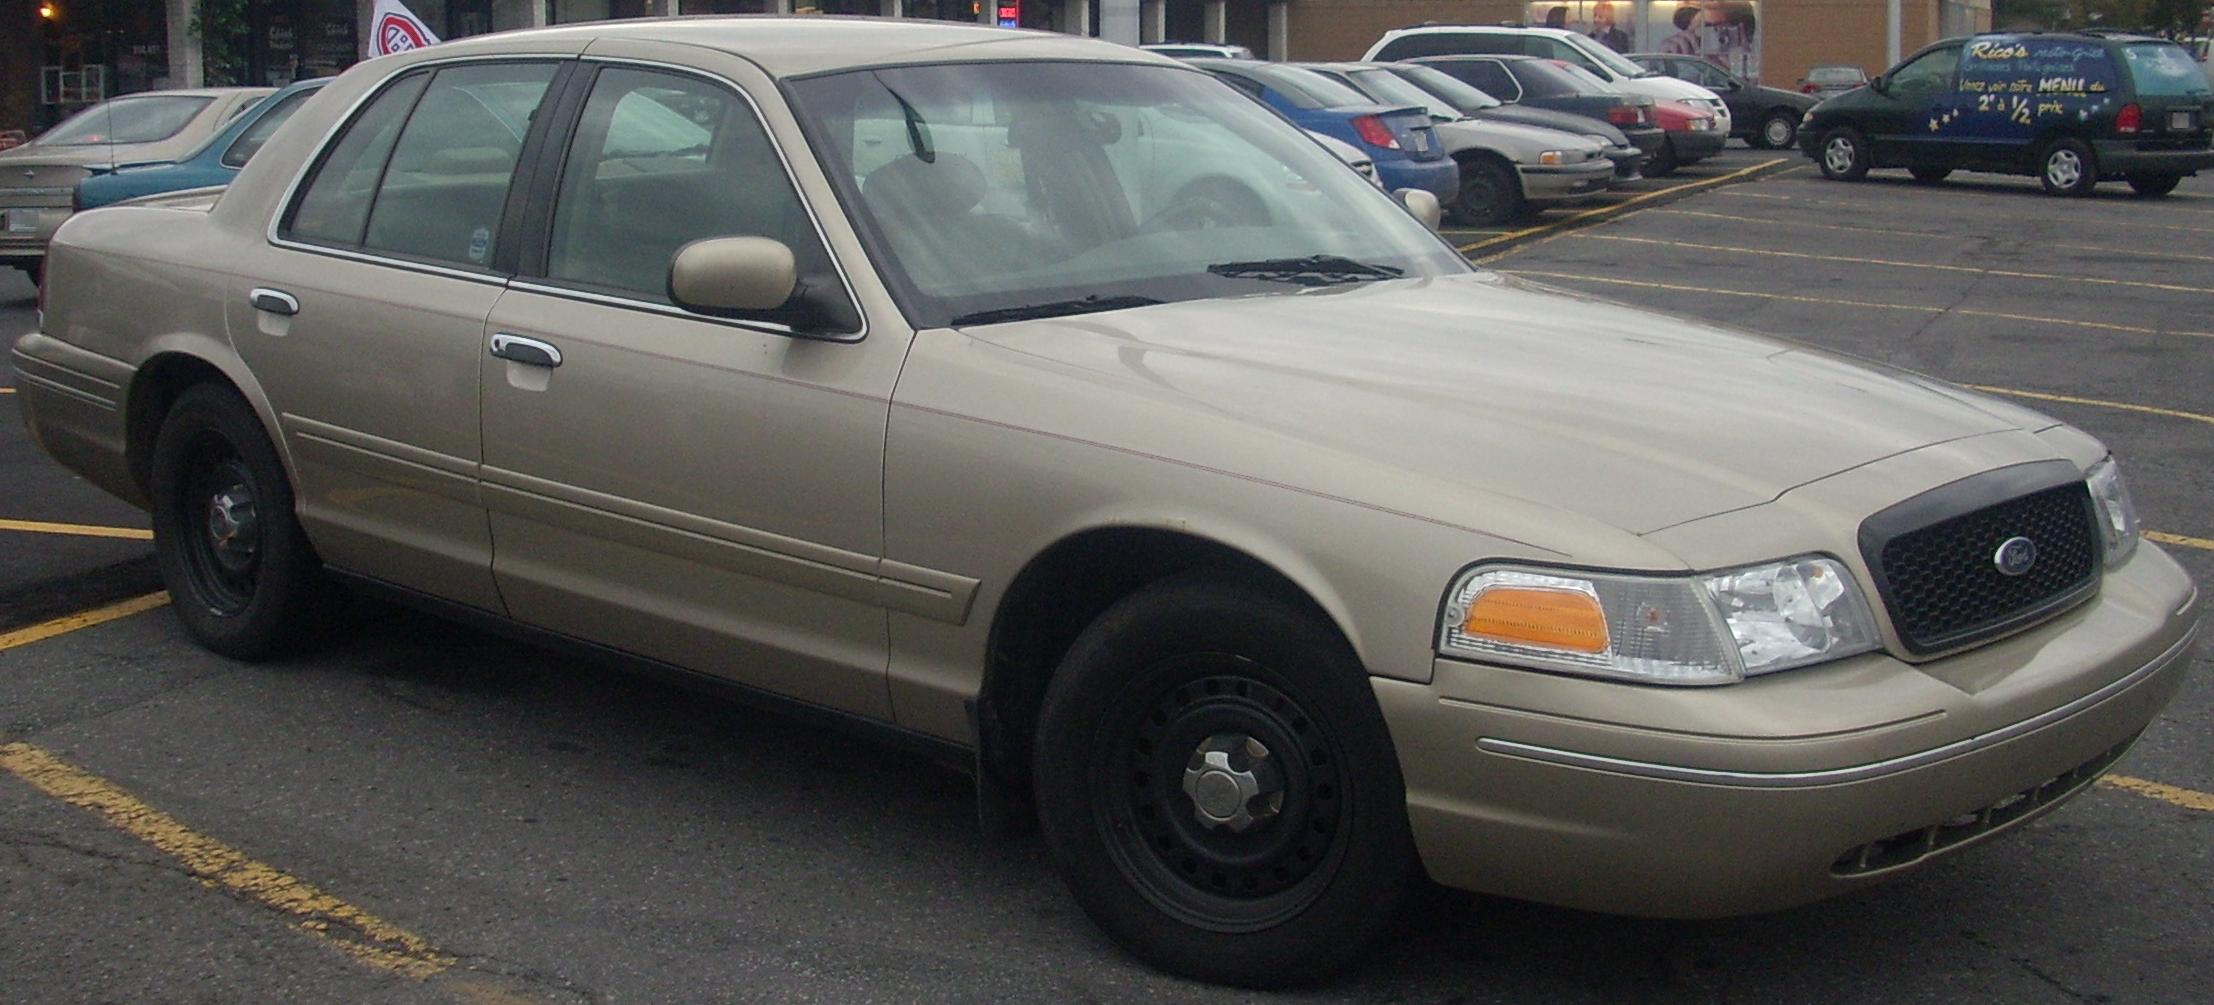 File:'98-'02 Ford Crown Victoria.JPG - Wikimedia Commons